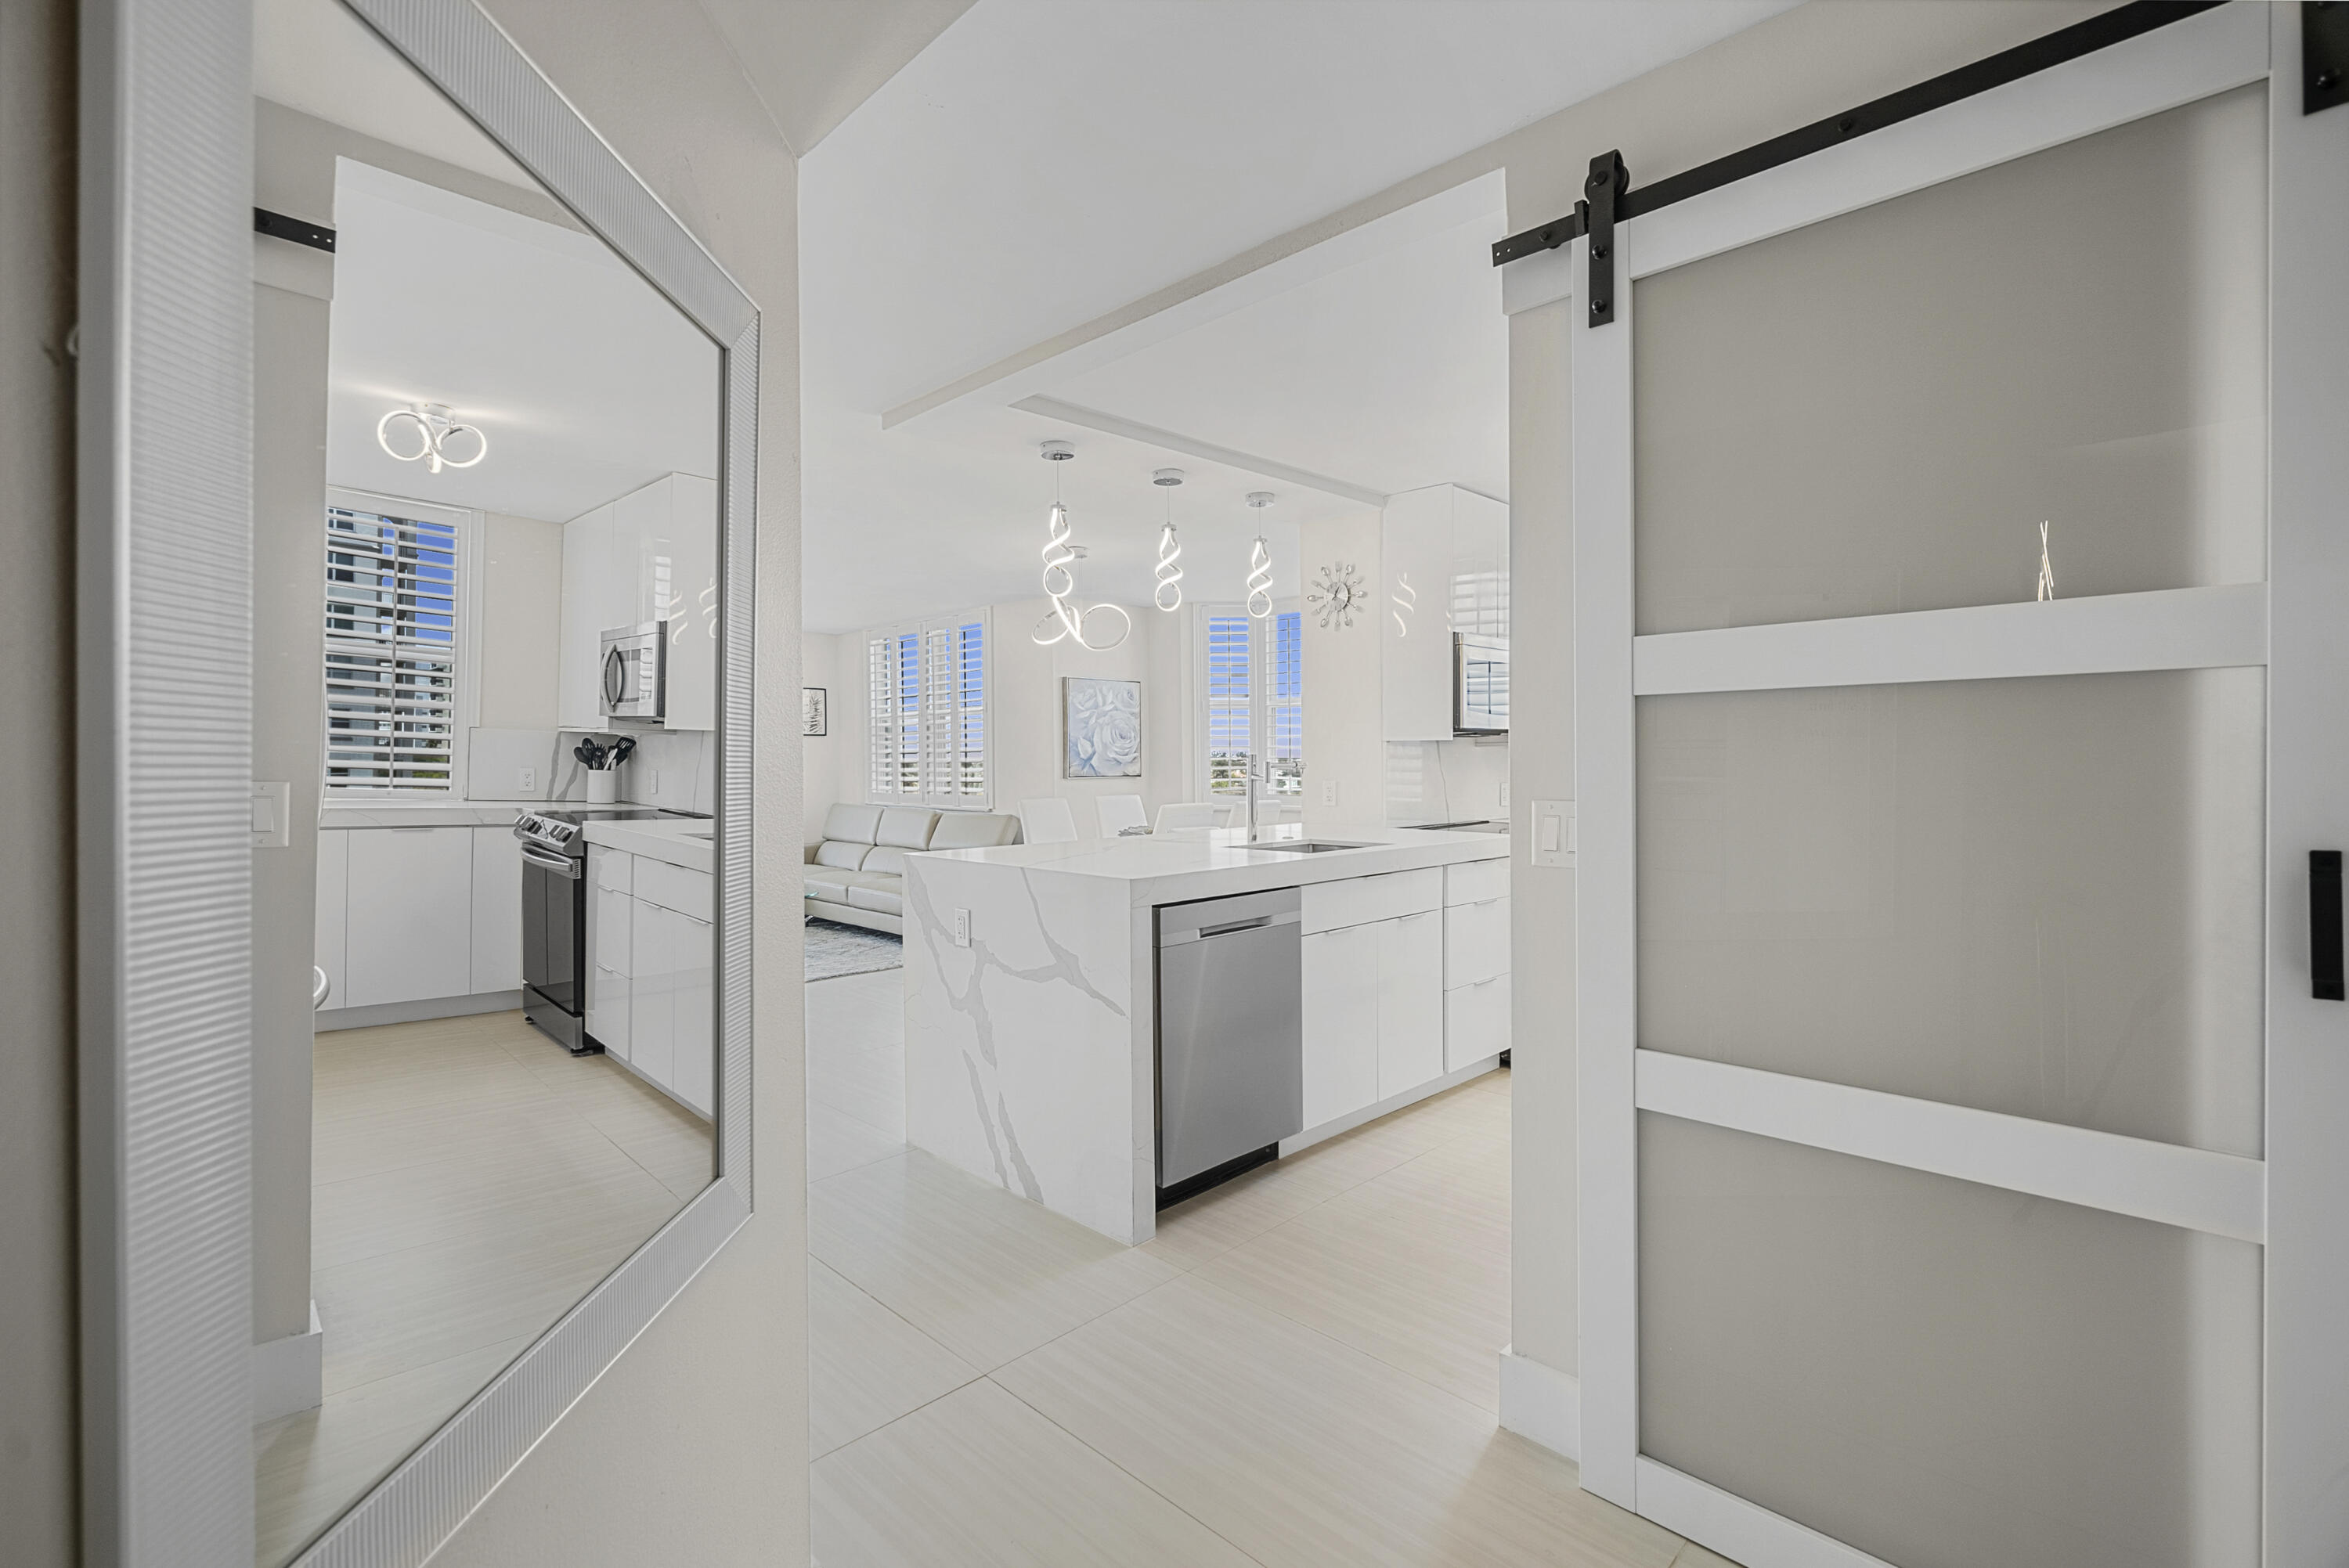 a view of a kitchen with white cabinets